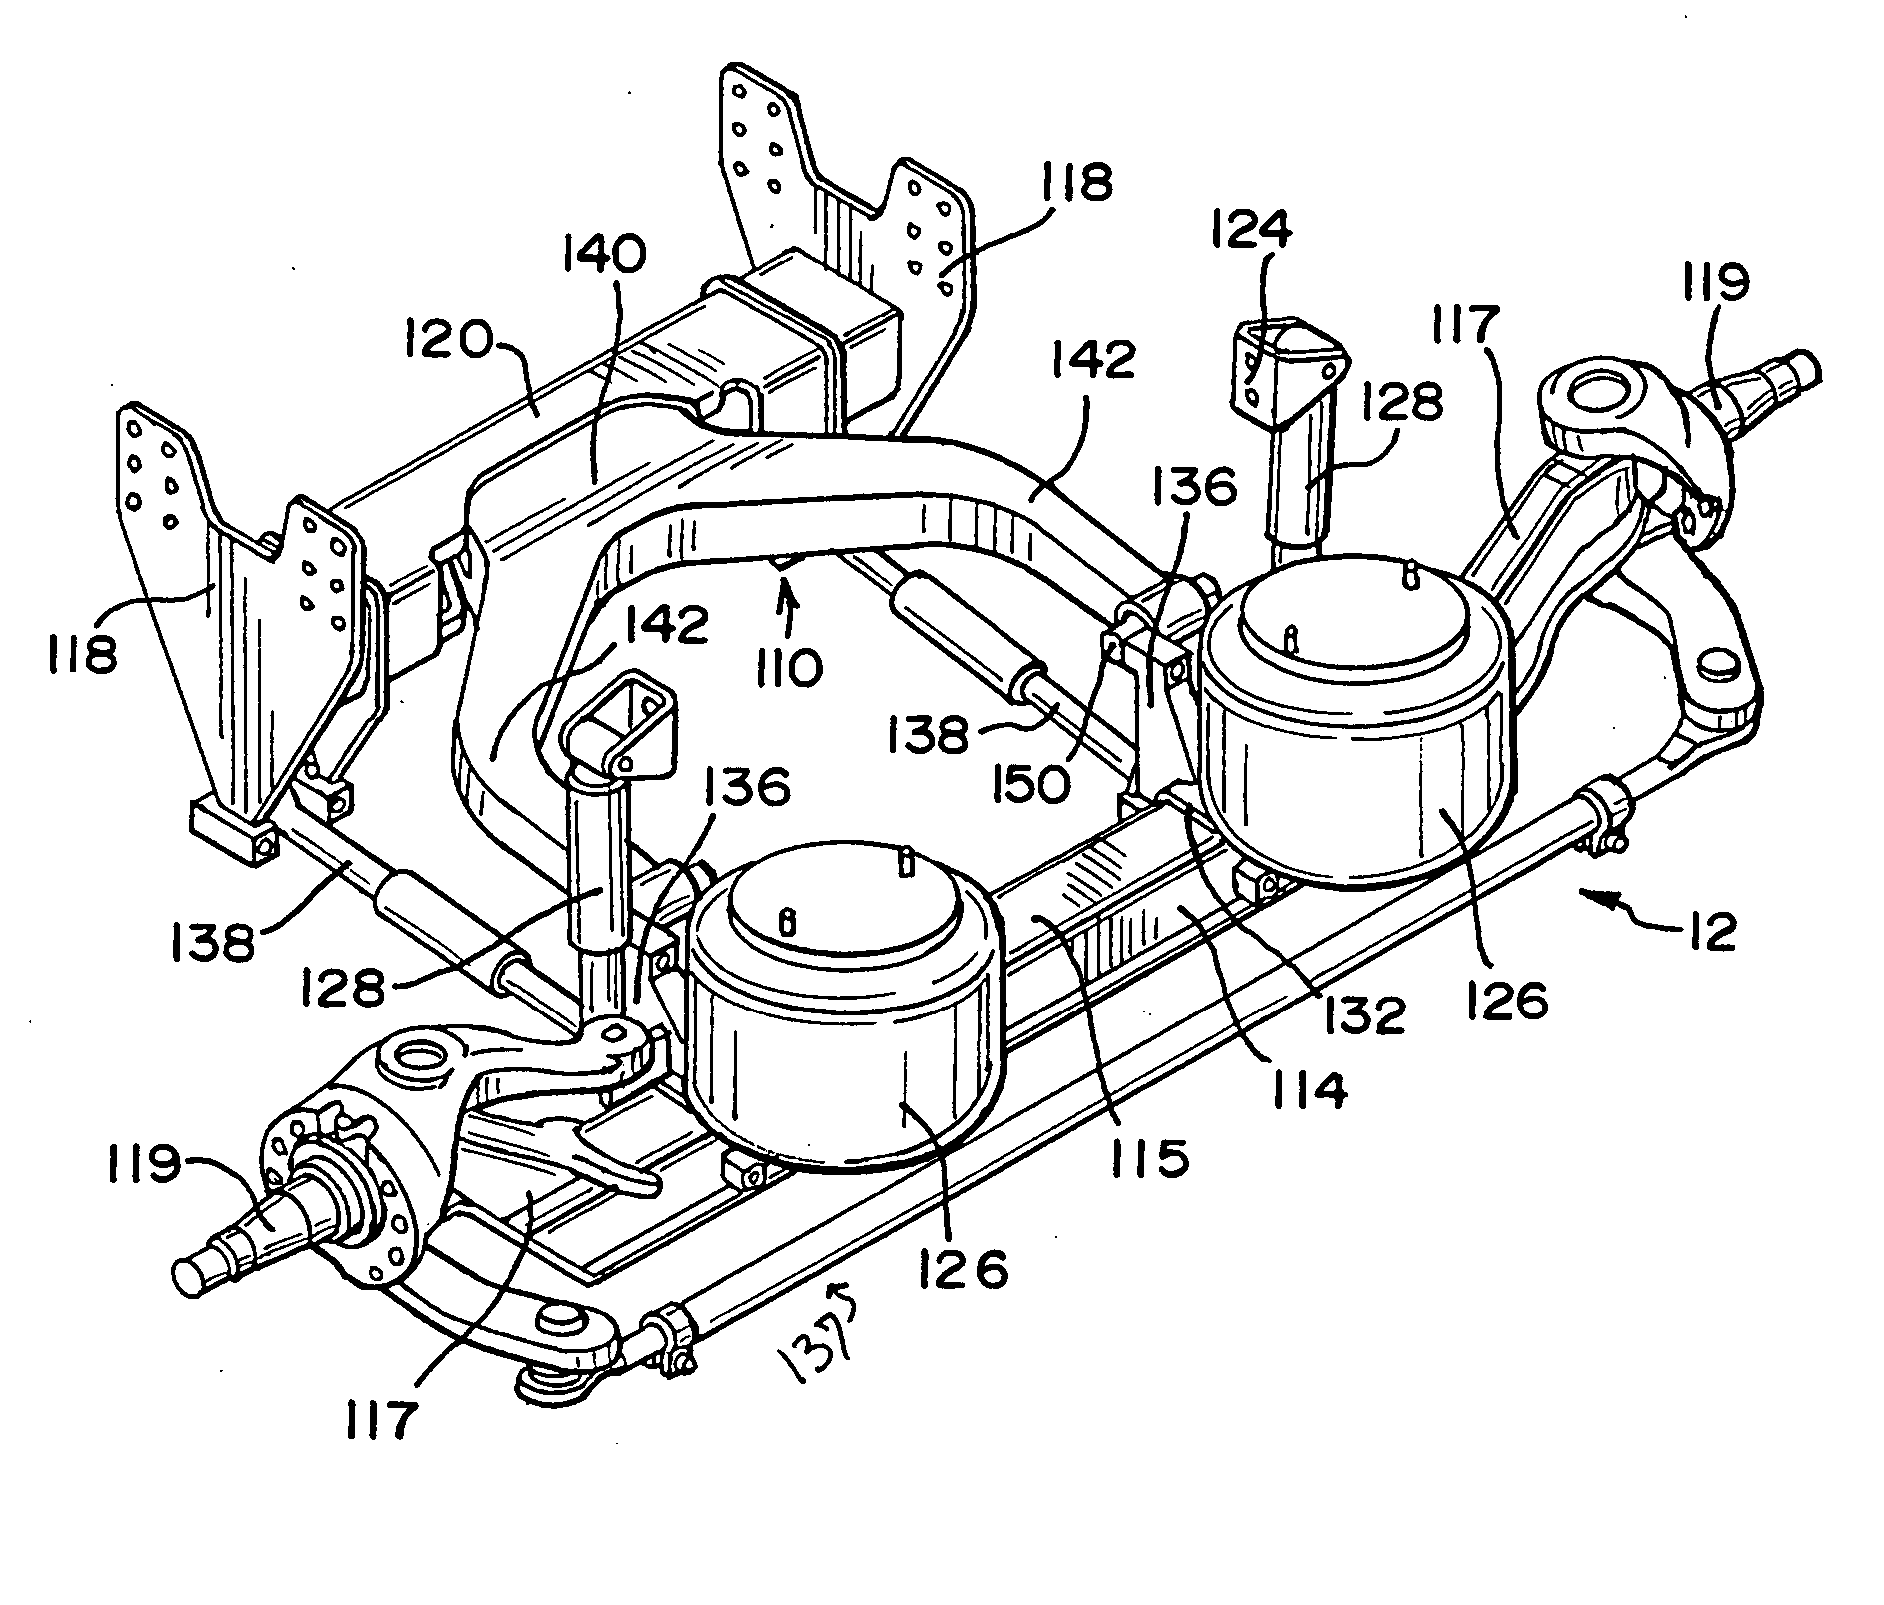 Wishbone-shaped linkage component and suspension systems incorporating the same